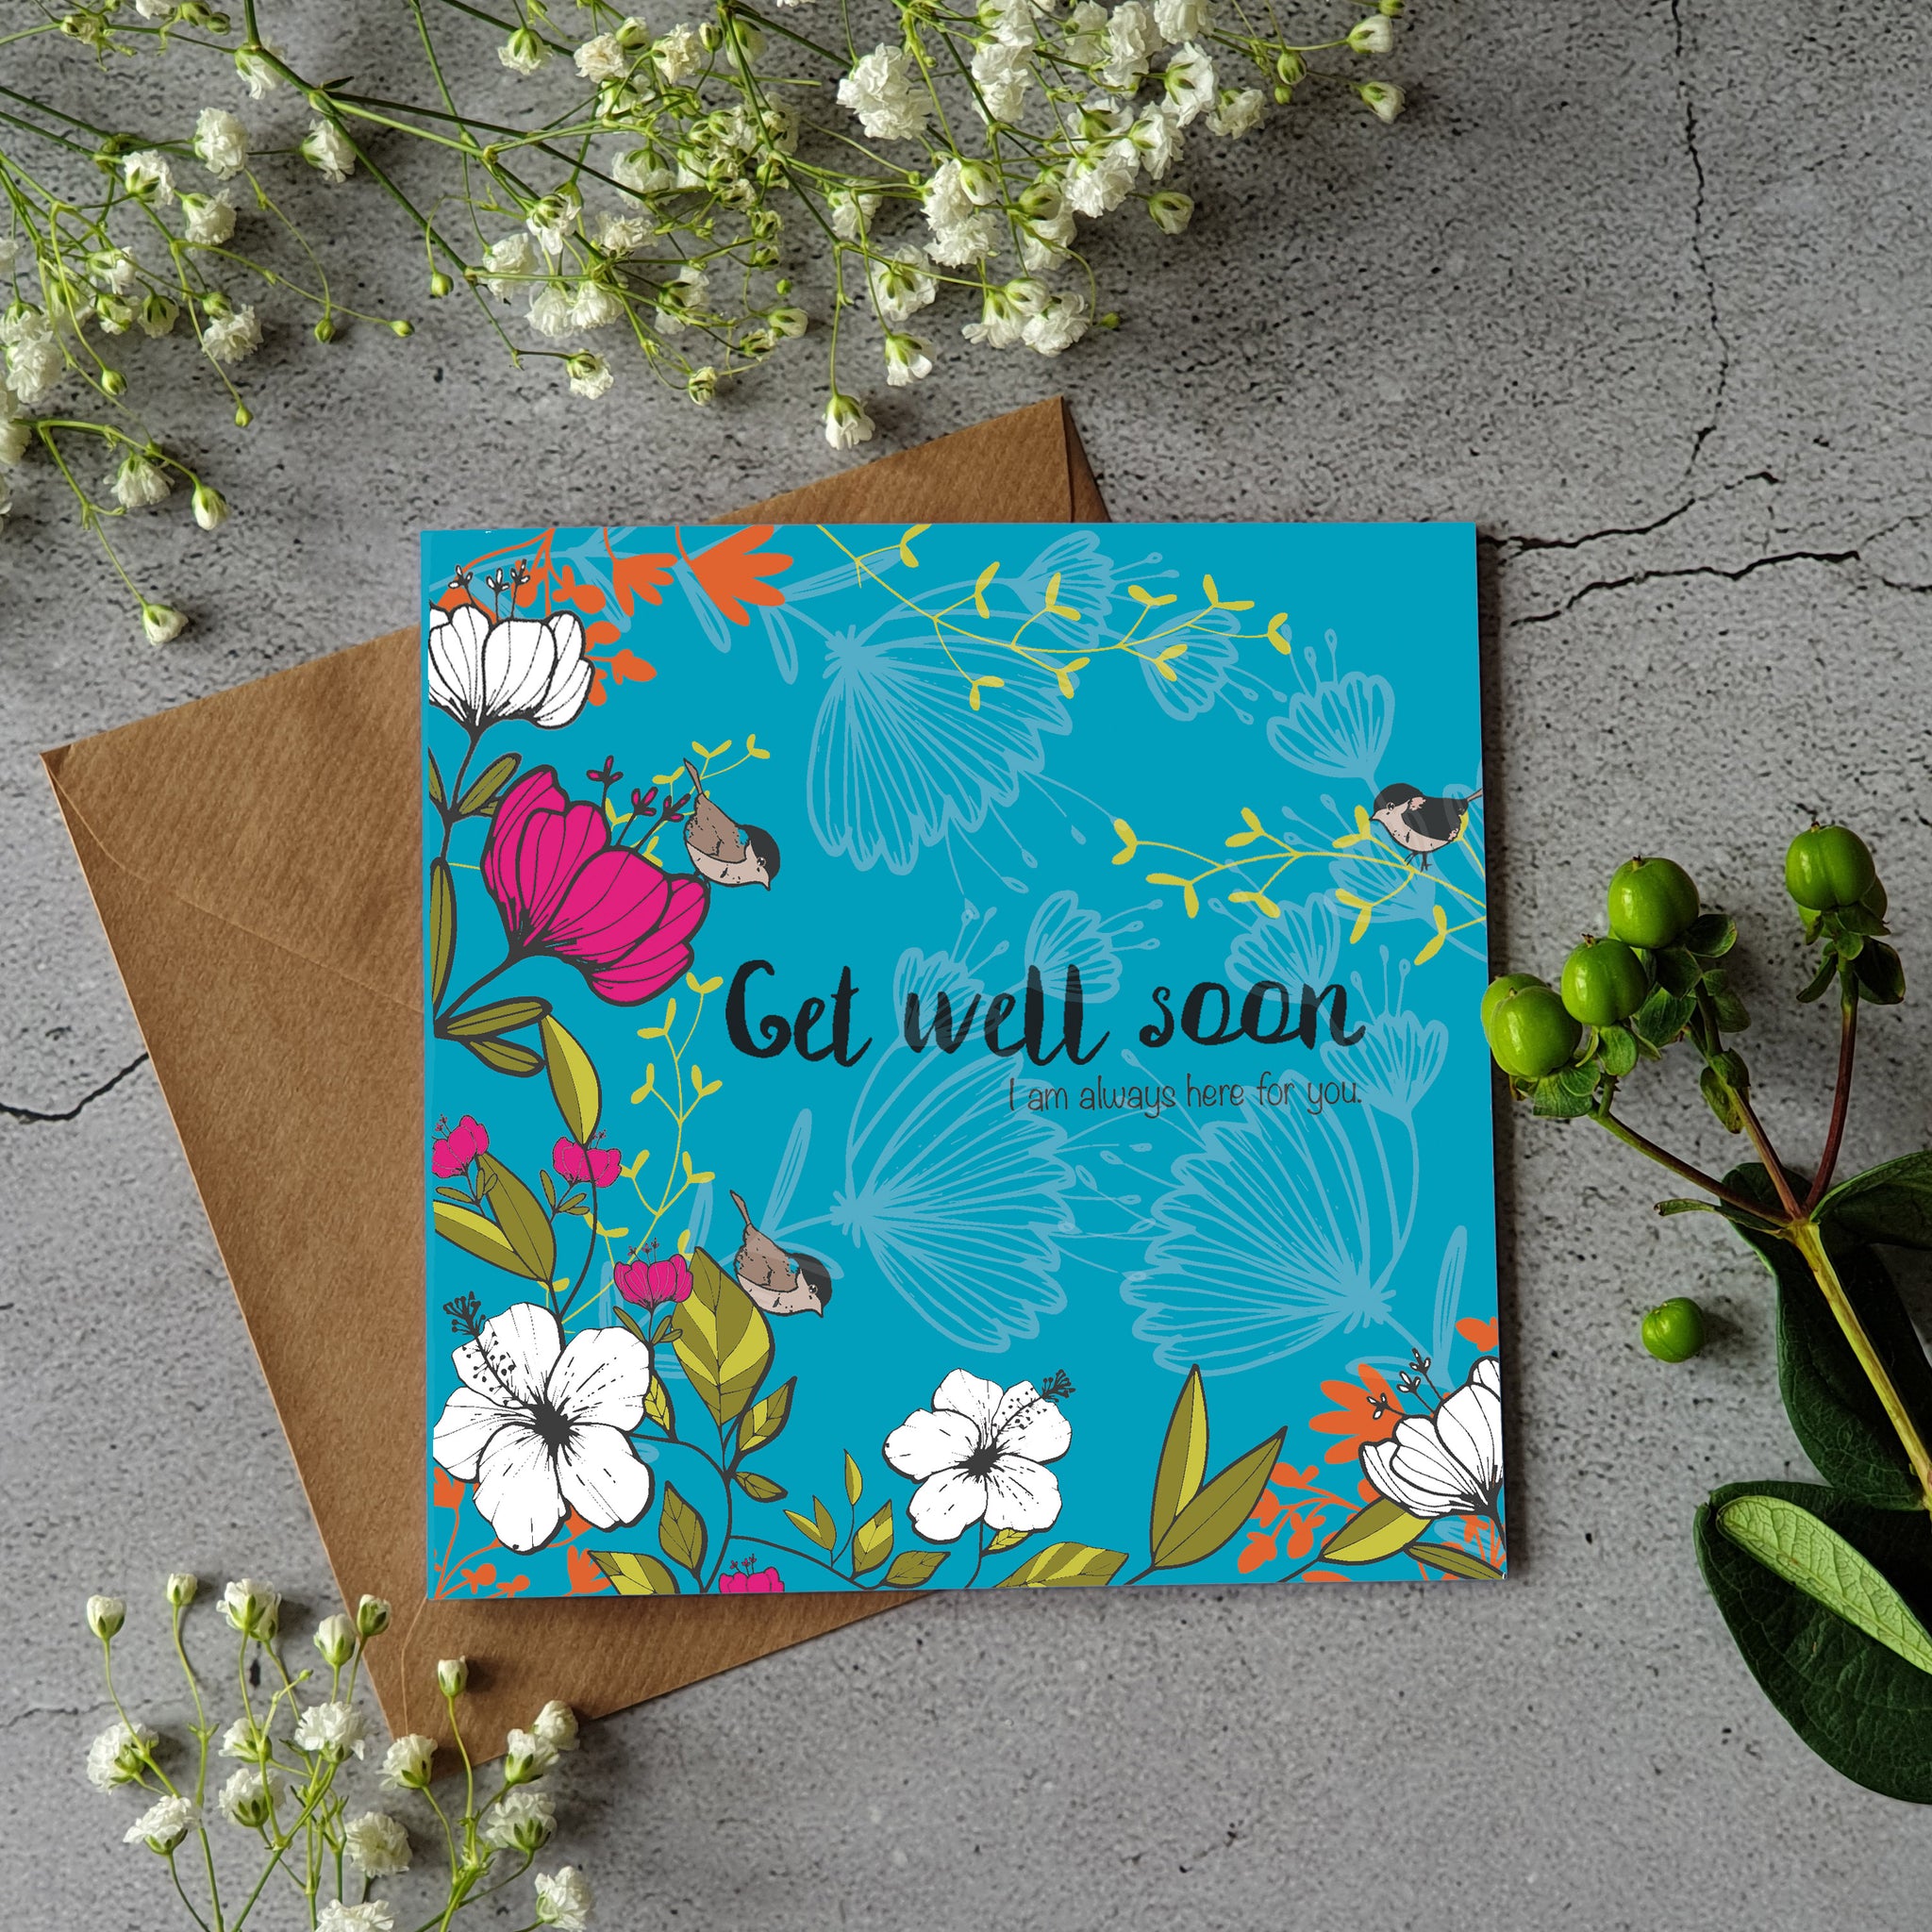 Get well soon - I'm always here for you - greeting card - Pretty Pink Jewellery